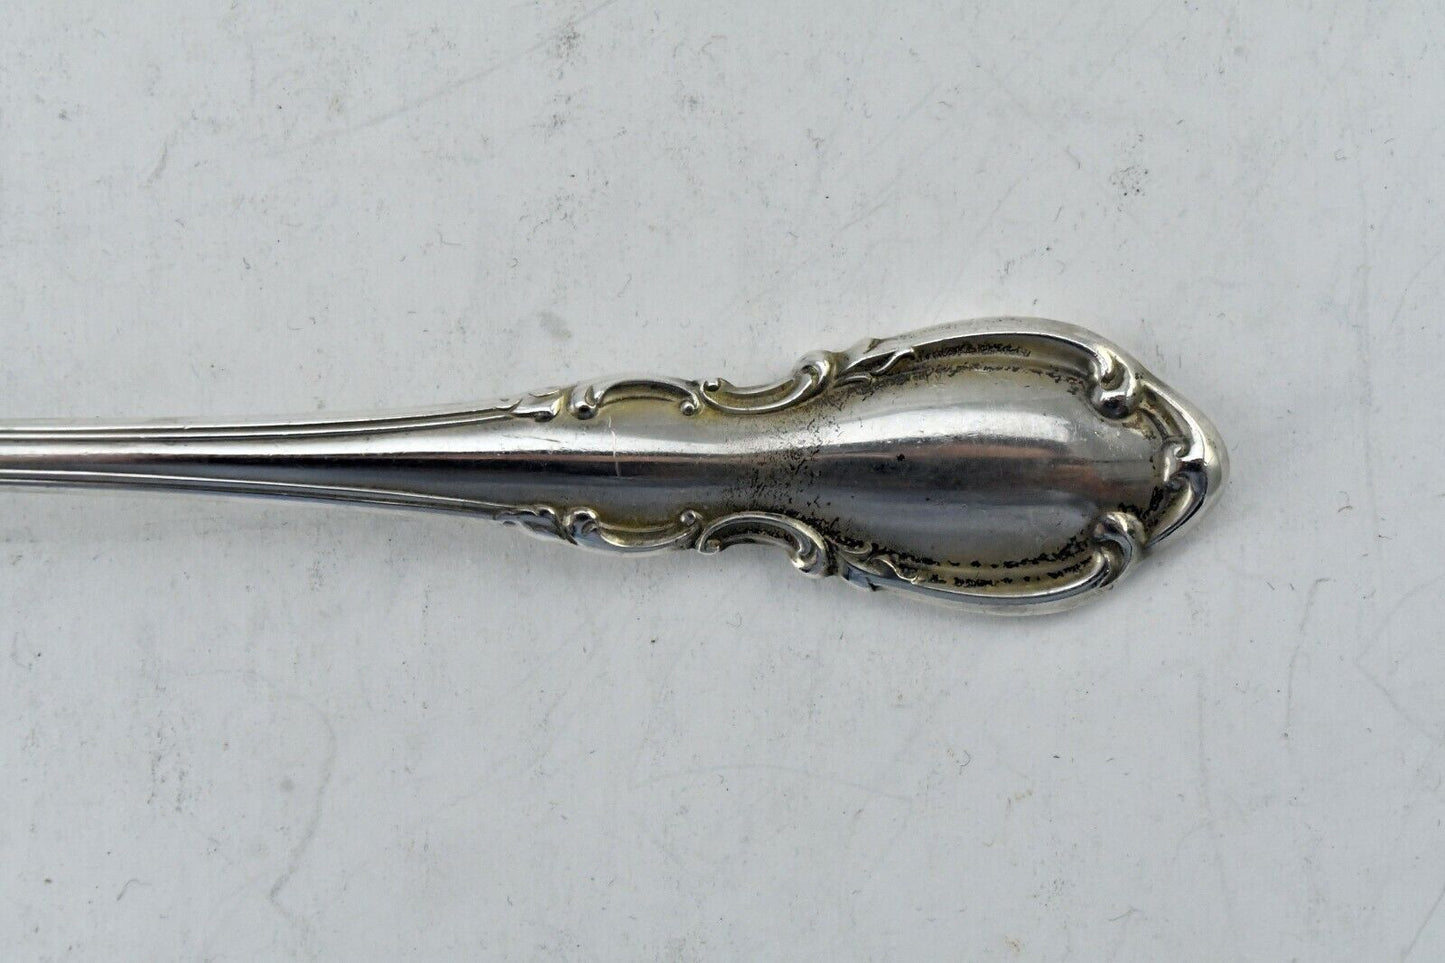 Legato by Towle Sterling Silver 6 1/2" Round Bowl Oval Soup Spoon 1.4 oz.